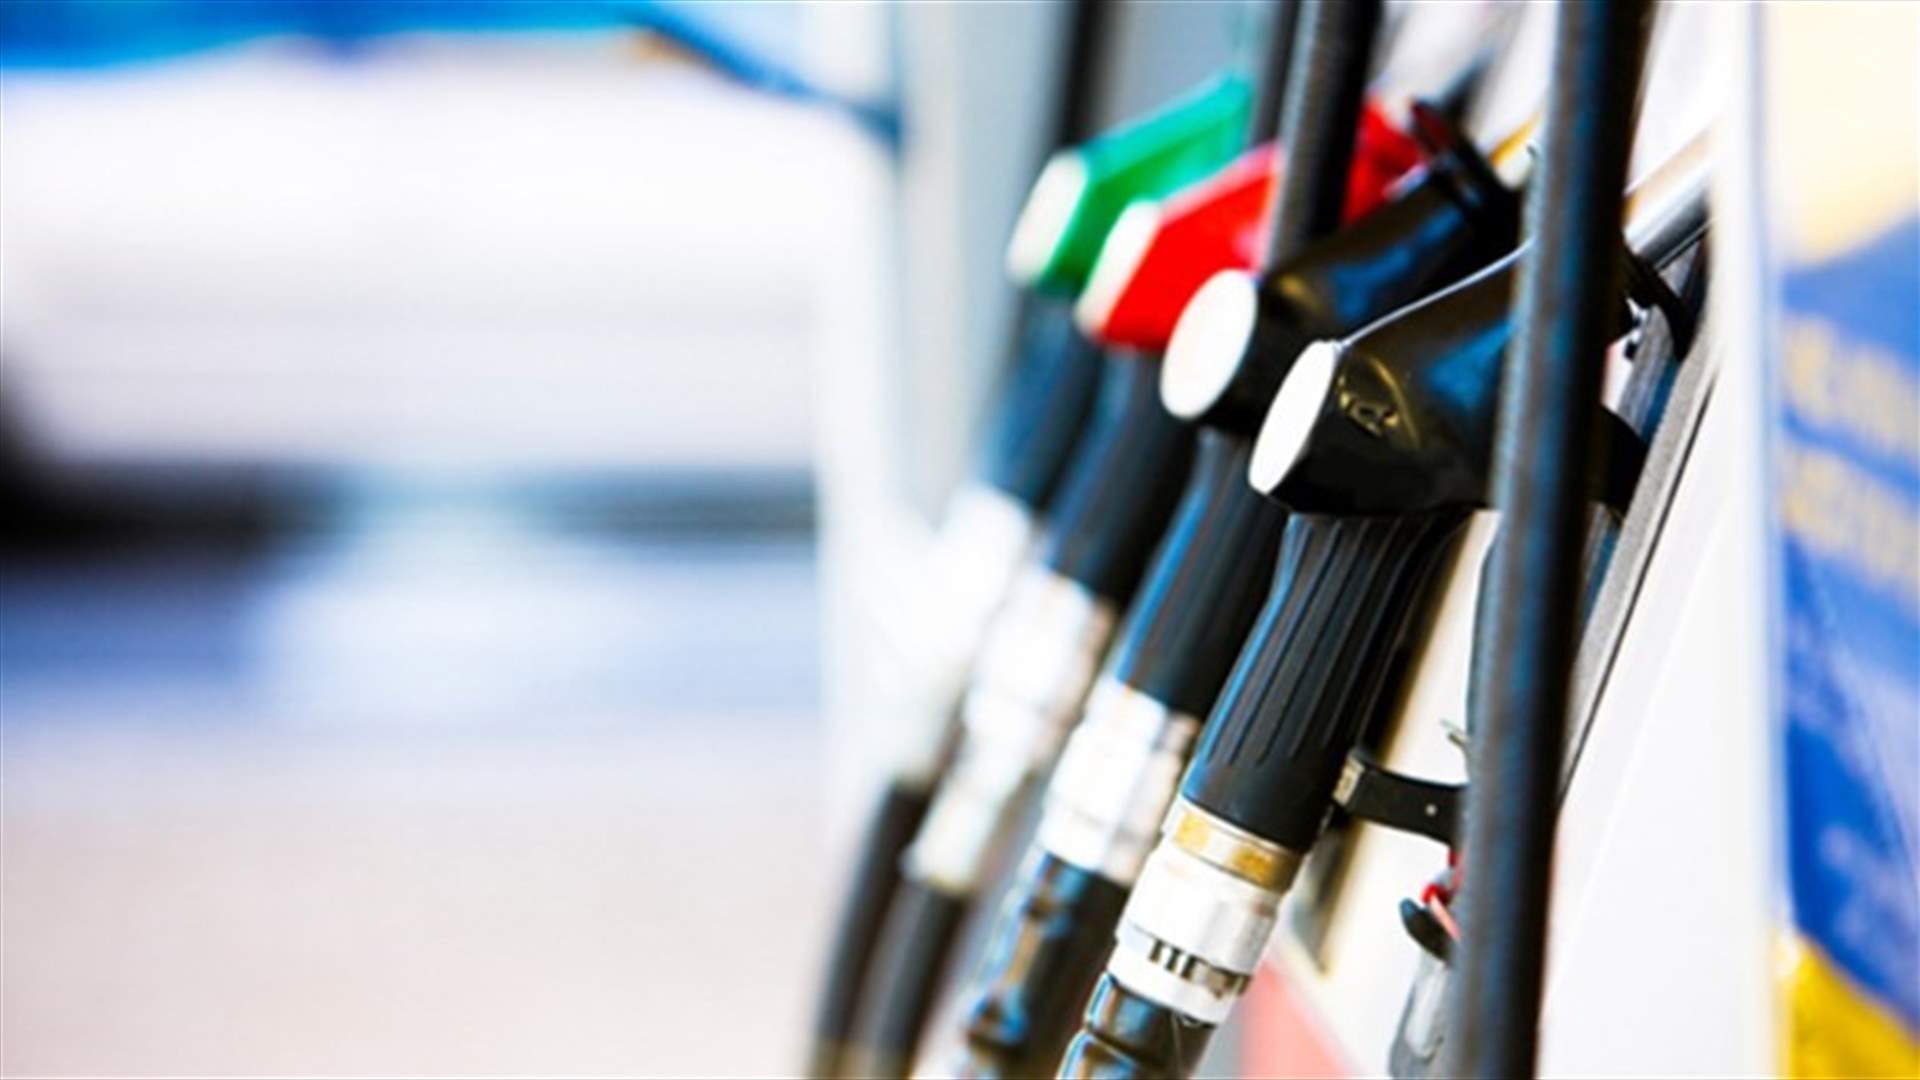 Price of gasoline remains unchanged 